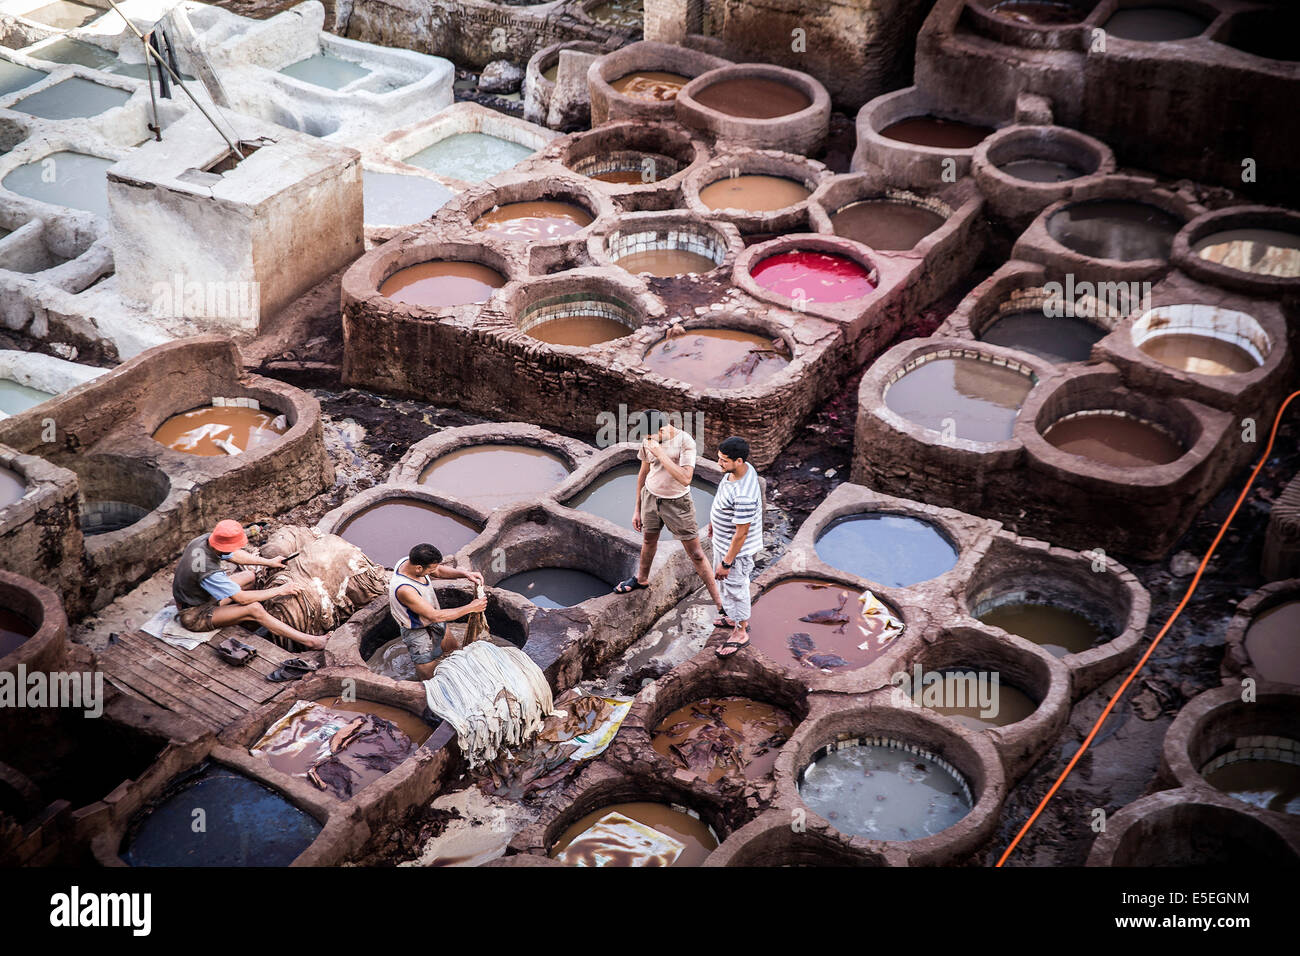 Tanneries where animal hides are traditionally tanned by hand, Fes, Morocco Stock Photo